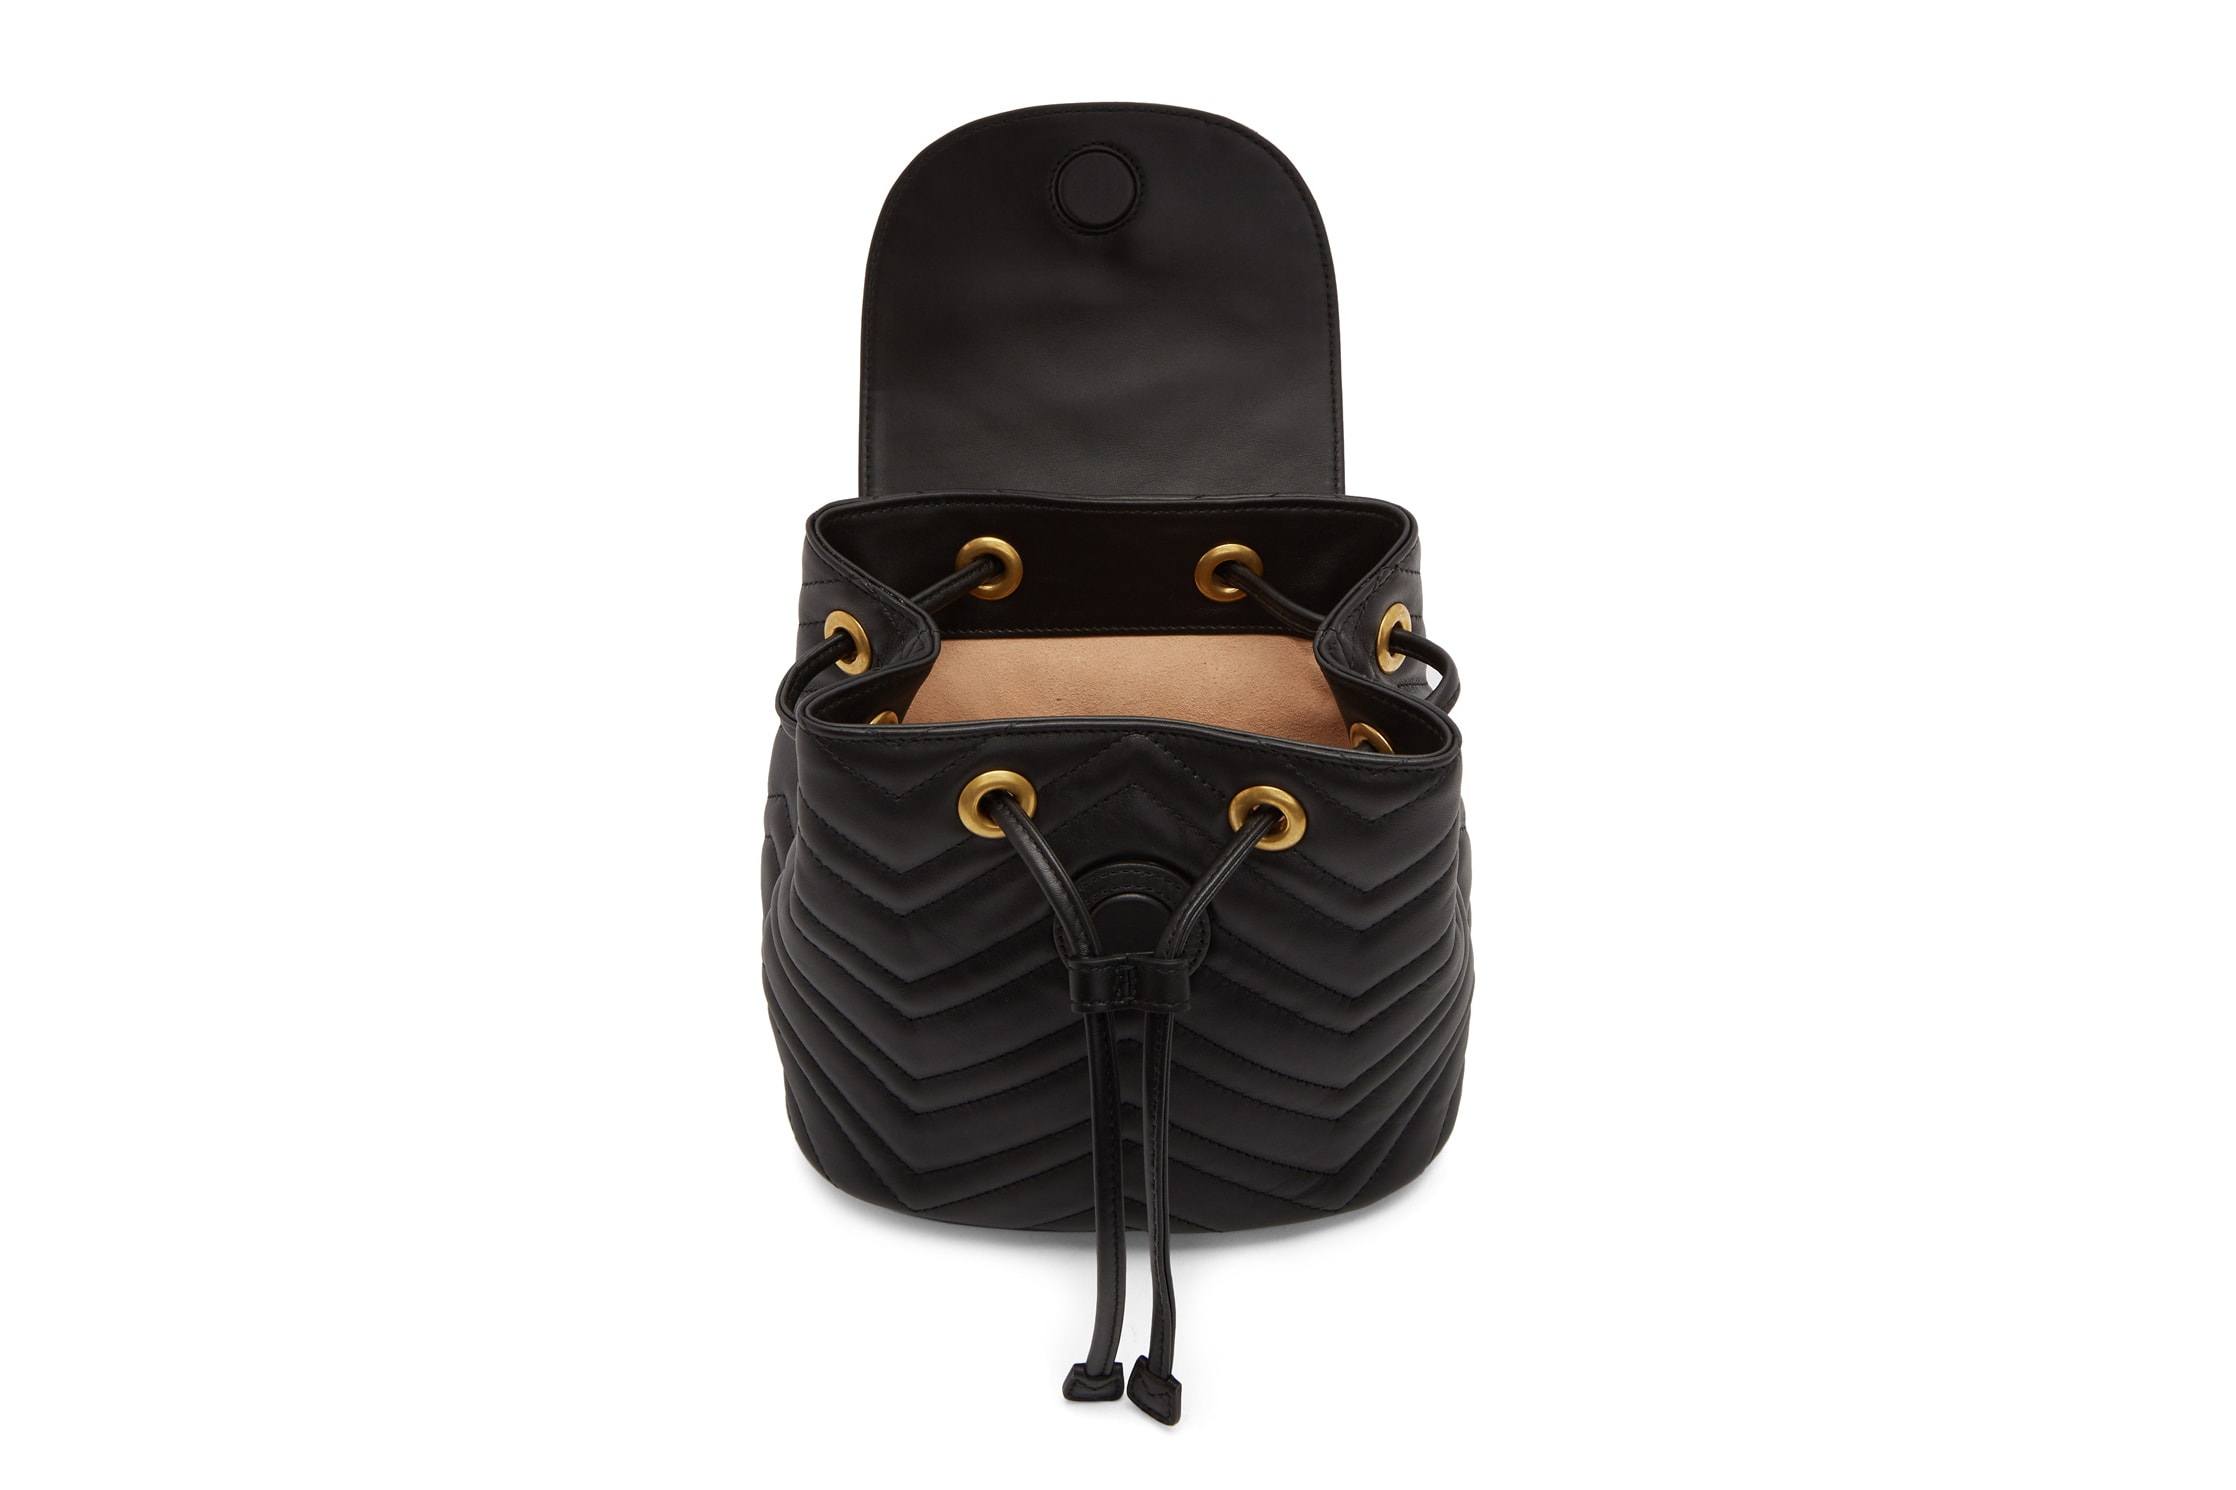 Gucci Marmont 2.0 Backpack in Black and Red Gold Hardware Logo GG Luxury Accessory Leather